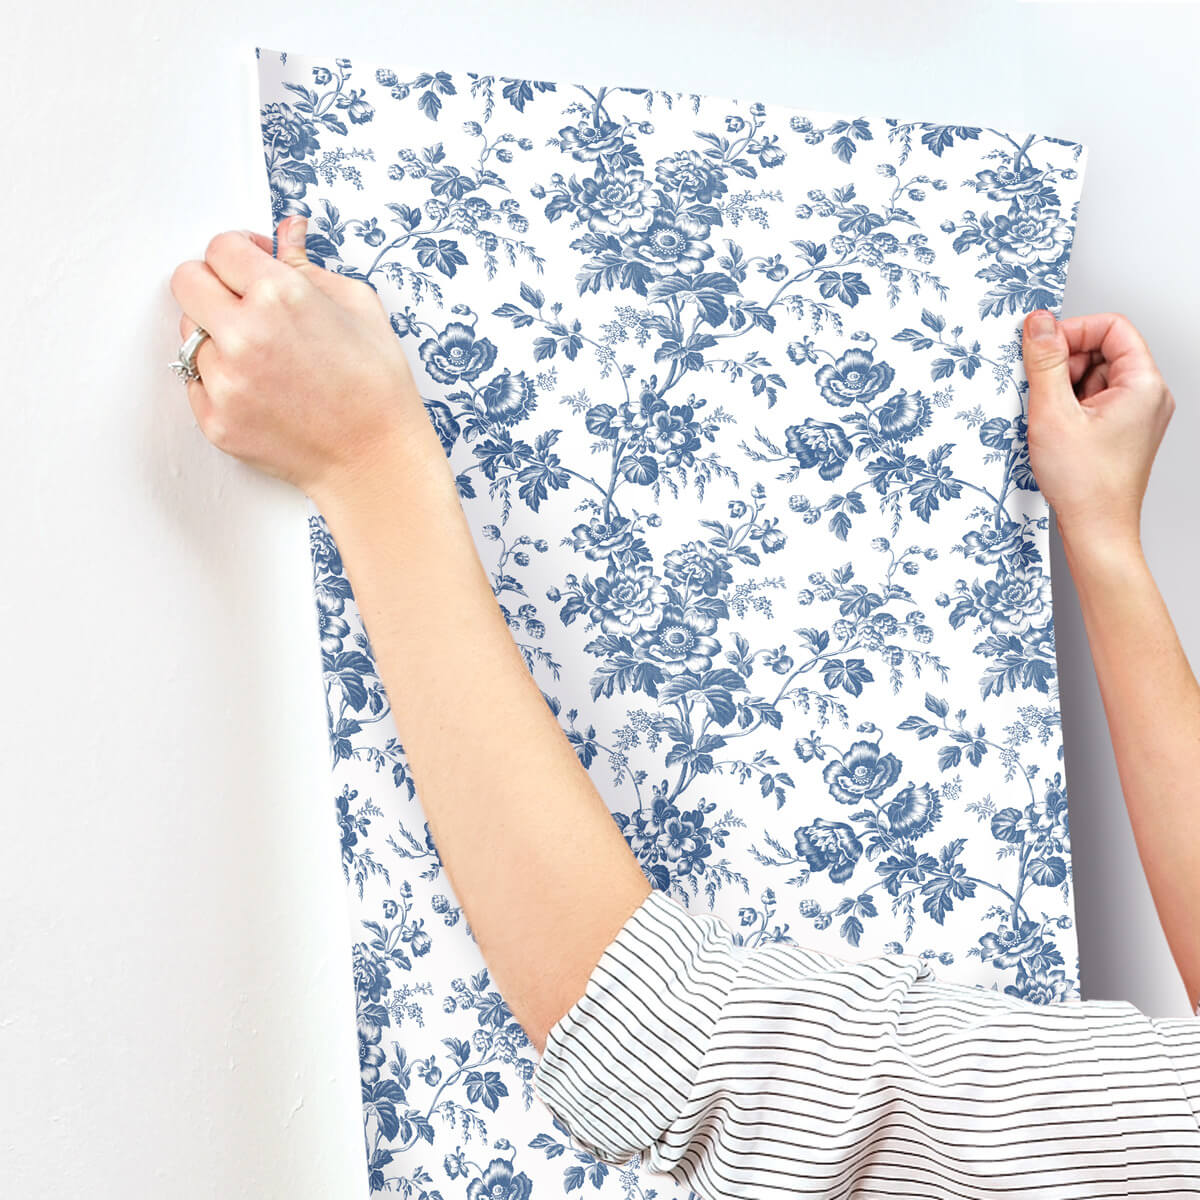 Toile Resource Library Anemone Toile Wallpaper - Blue